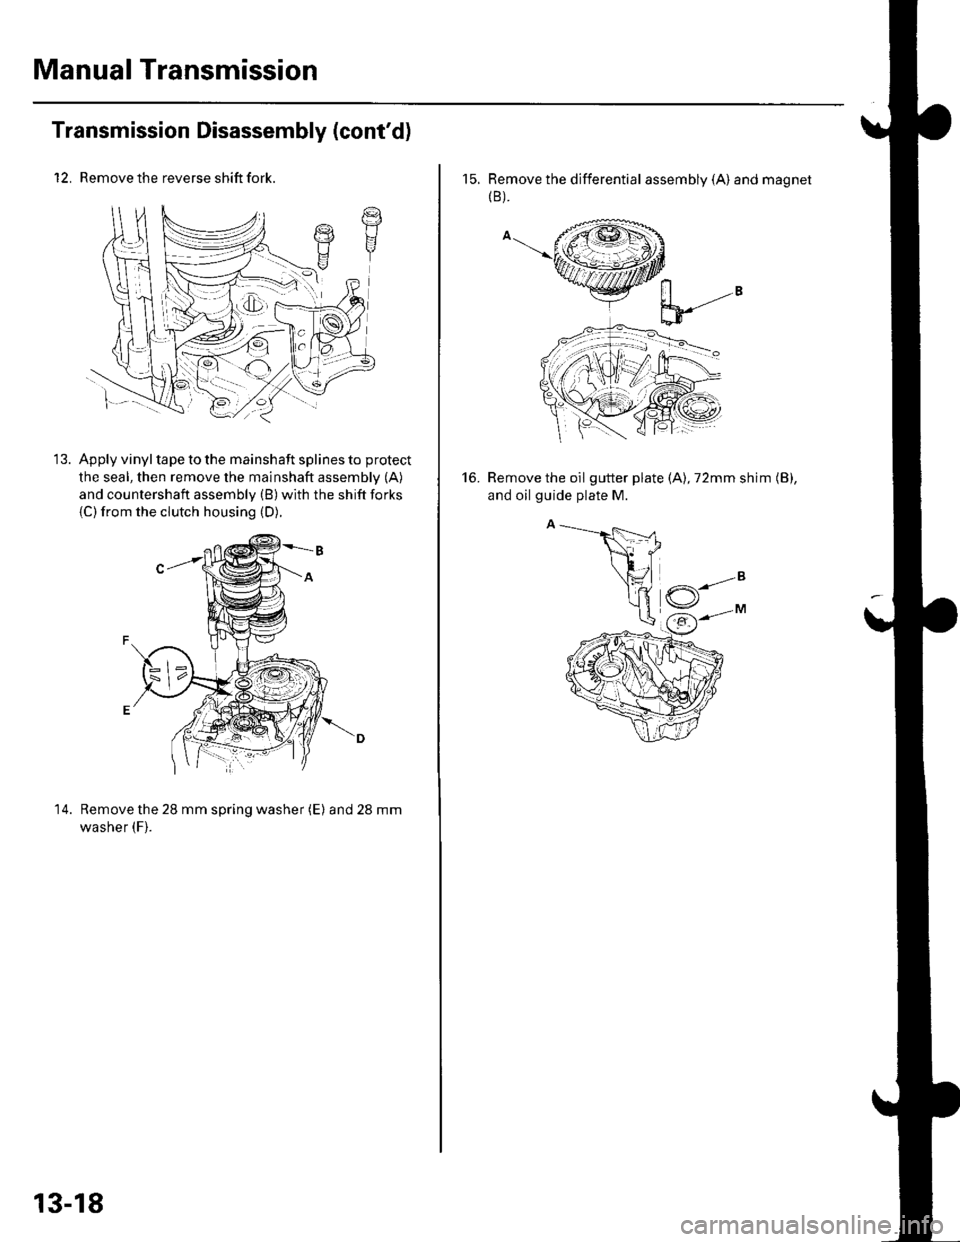 HONDA CIVIC 2003 7.G Workshop Manual Manual Transmission
Transmission Disassembly (contd)
12. Remove the reverse shift fork.
Apply vinyl tape to the mainshaft splines to protect
the seal, then remove the mainshaft assembly (A)
and count